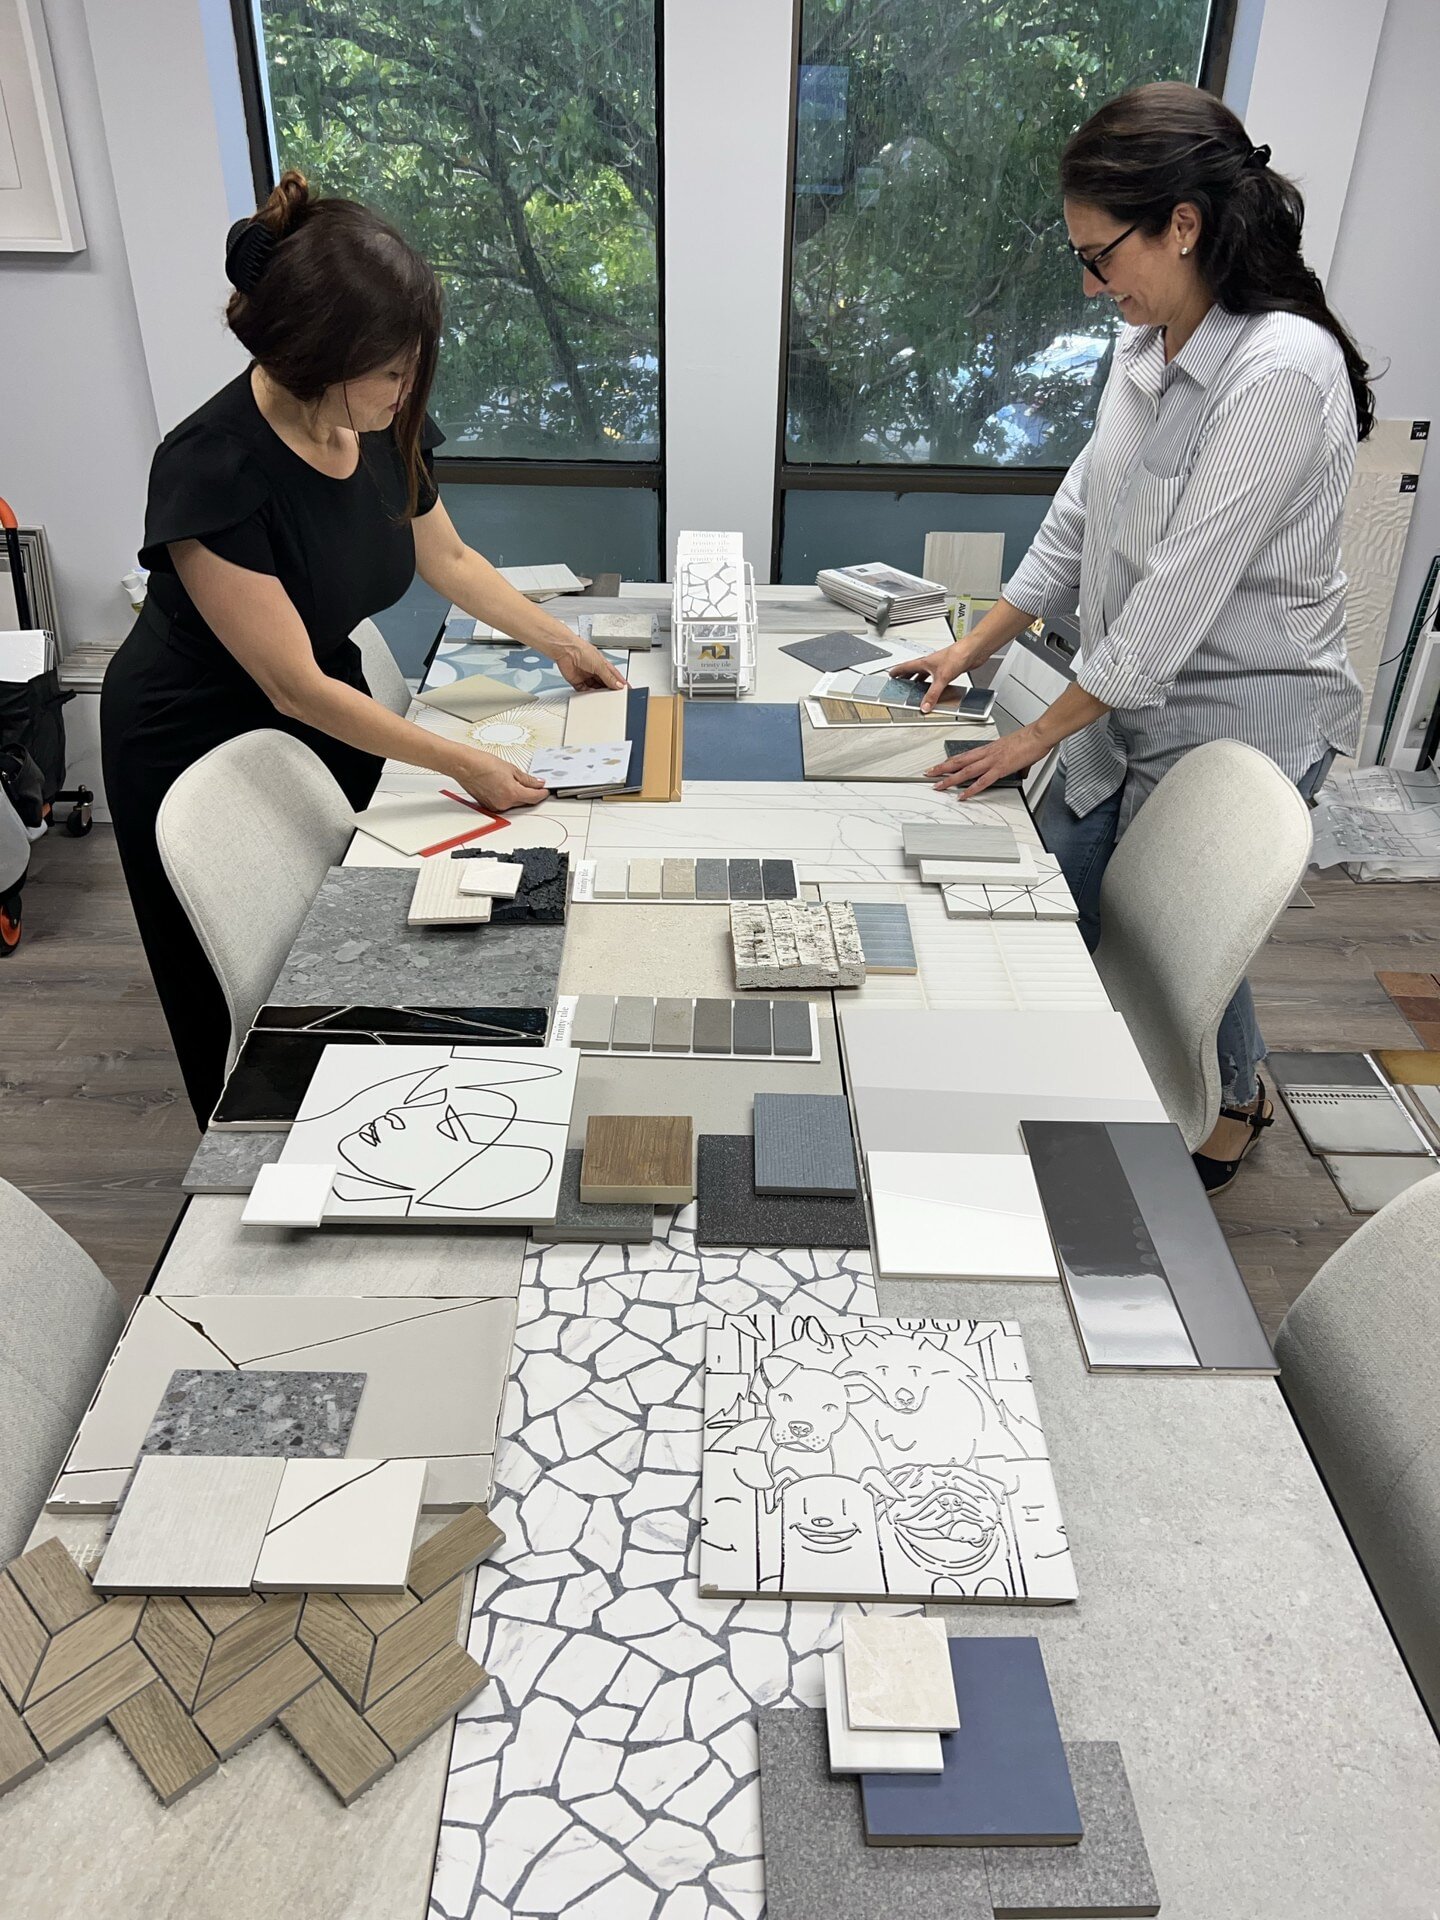 #materialsmonday @Trinitytile collaborating on our finish selections, check out the sneak peak of all the goods! #vendorappreciation #tile #interiordesign #interiordesigners #designwithoneline